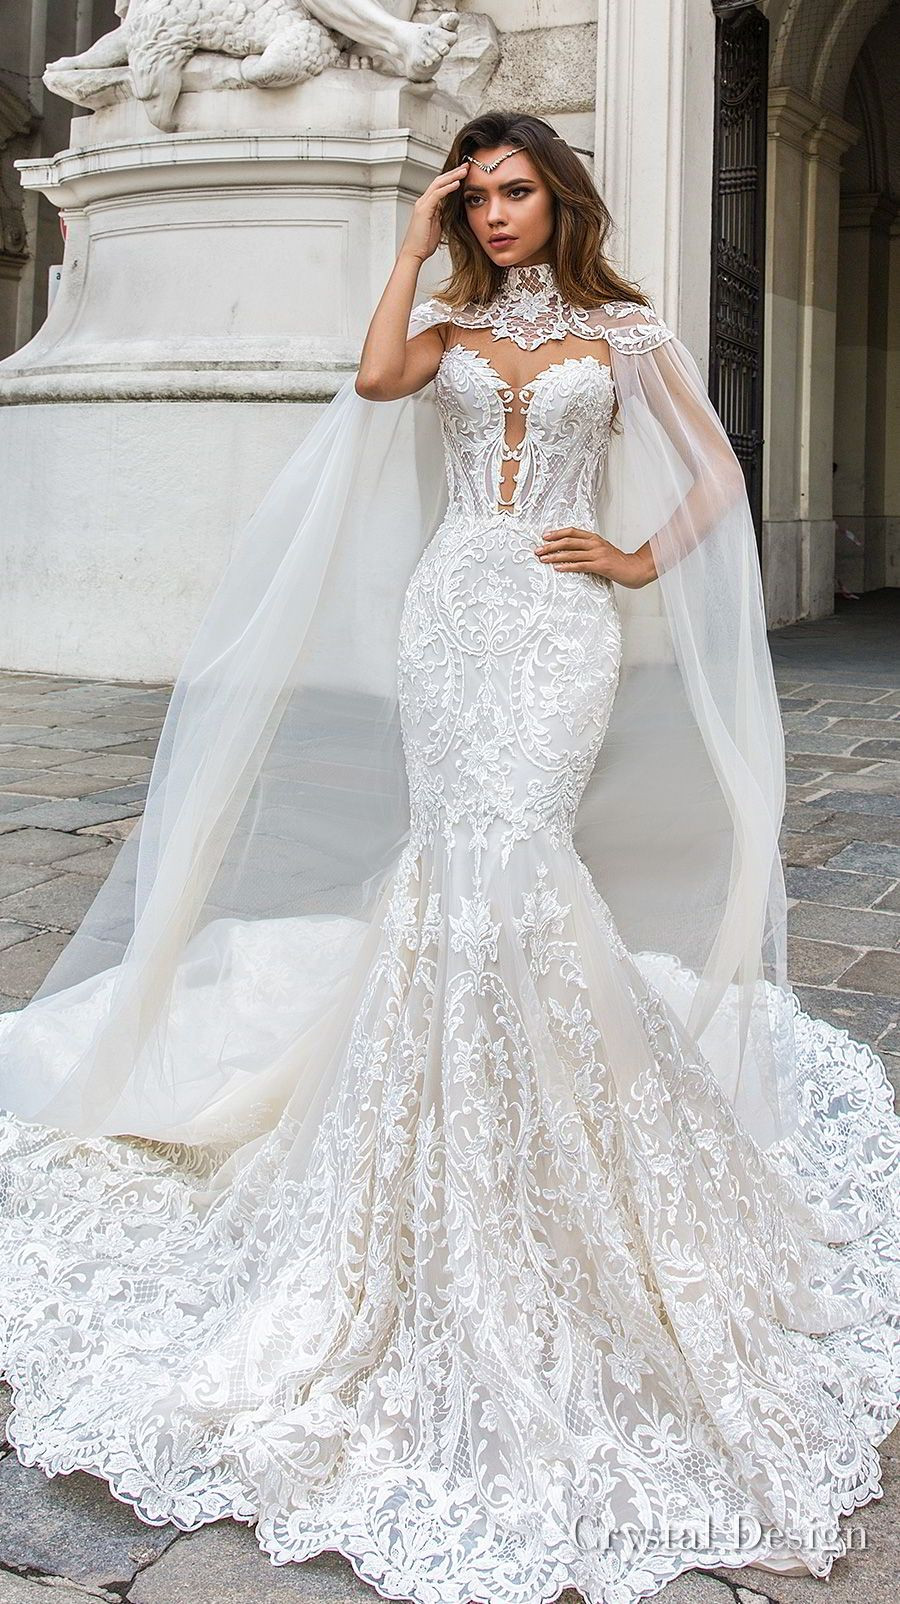 Expensive Wedding Dresses
 Most Expensive Wedding Gowns 2018 Crystal Design 2018